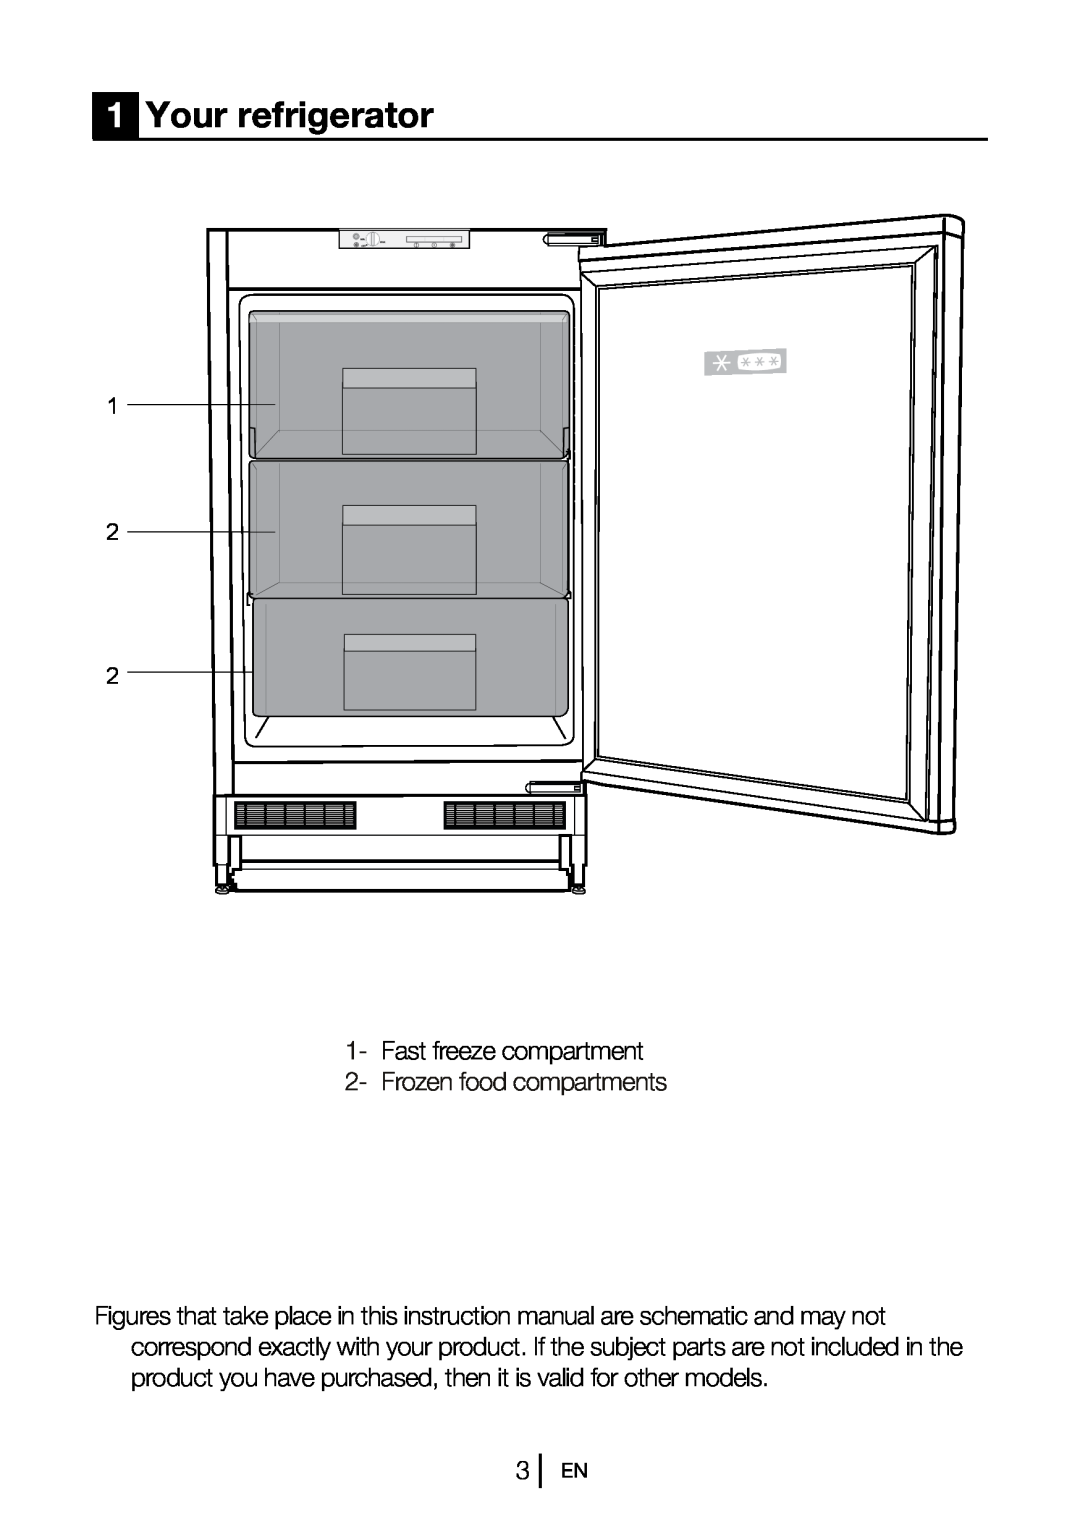 Beko BZ31 manual 1Your refrigerator, Fast freeze compartment 